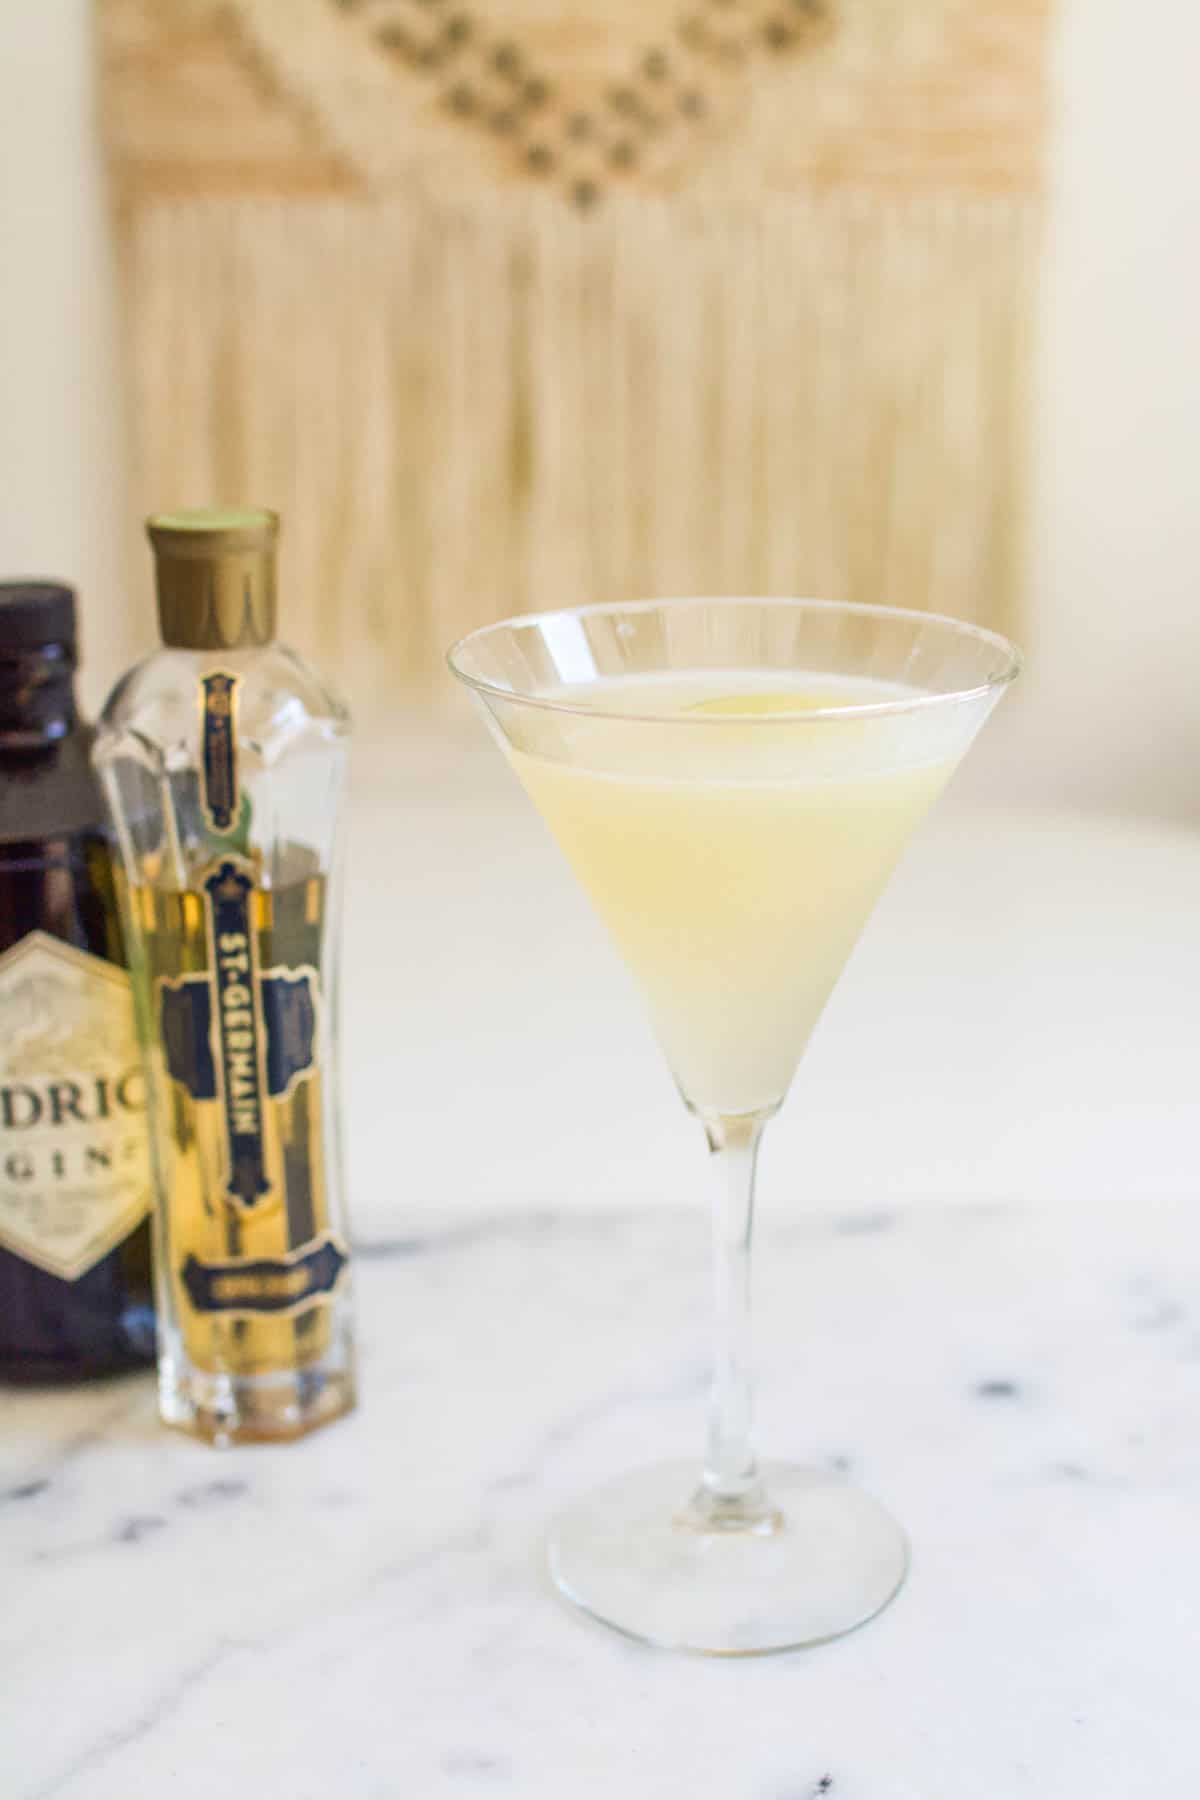 A St. Germain French gimlet cocktail in a martini glass on a table with a bottle of St Germain and gin behind it.